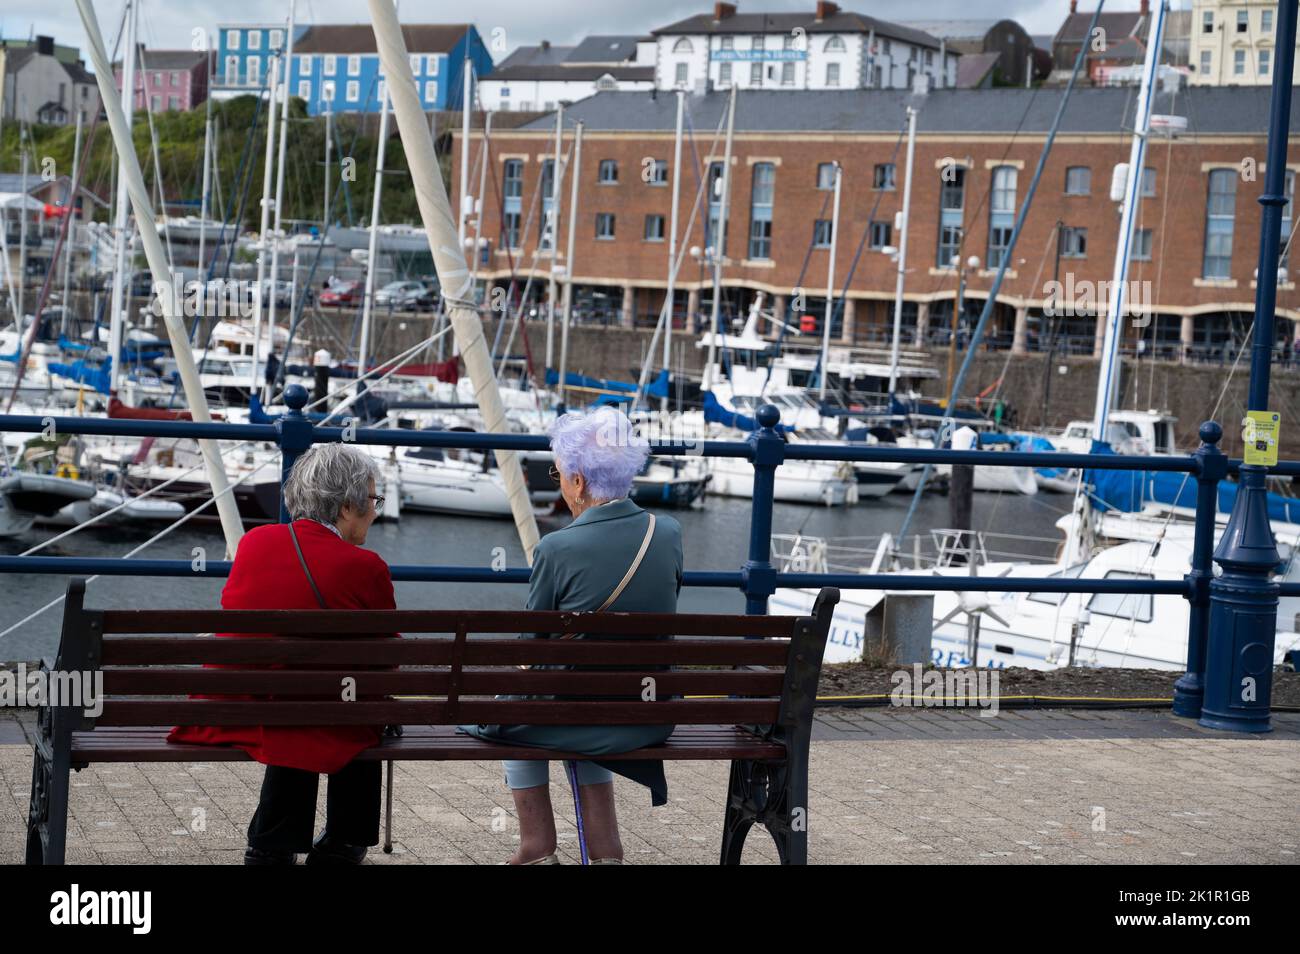 Wales, Pembrokeshire. Milford haven marina. Yachts and two older women sat on a bench. Stock Photo